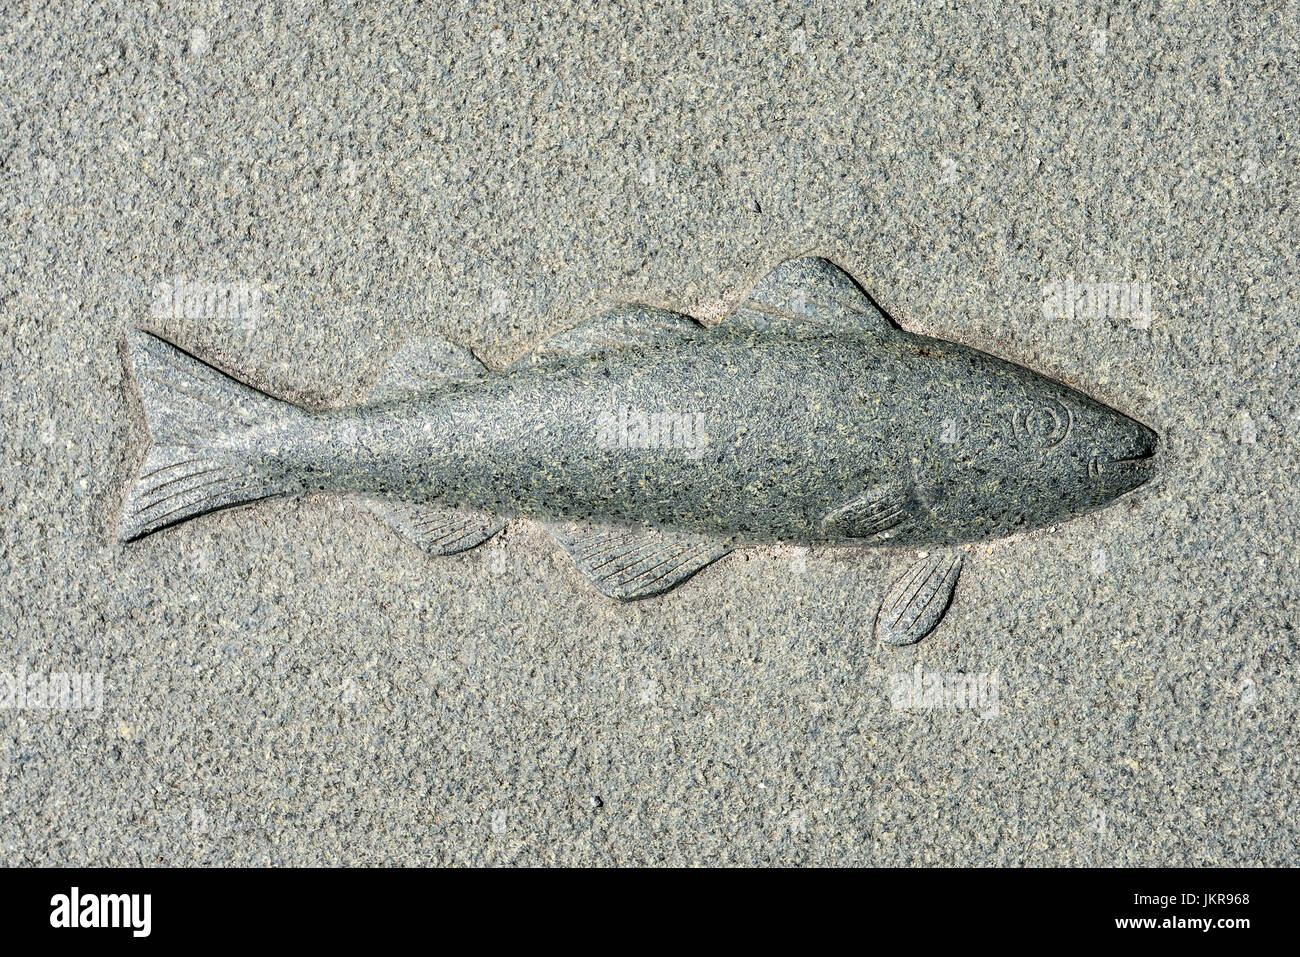 Fish relief in the beach avenue in lagoon jug, Schleswig - Holstein, Germany, Europe, Fischrelief an der Strandallee in Haffkrug, Schleswig-Holstein,  Stock Photo